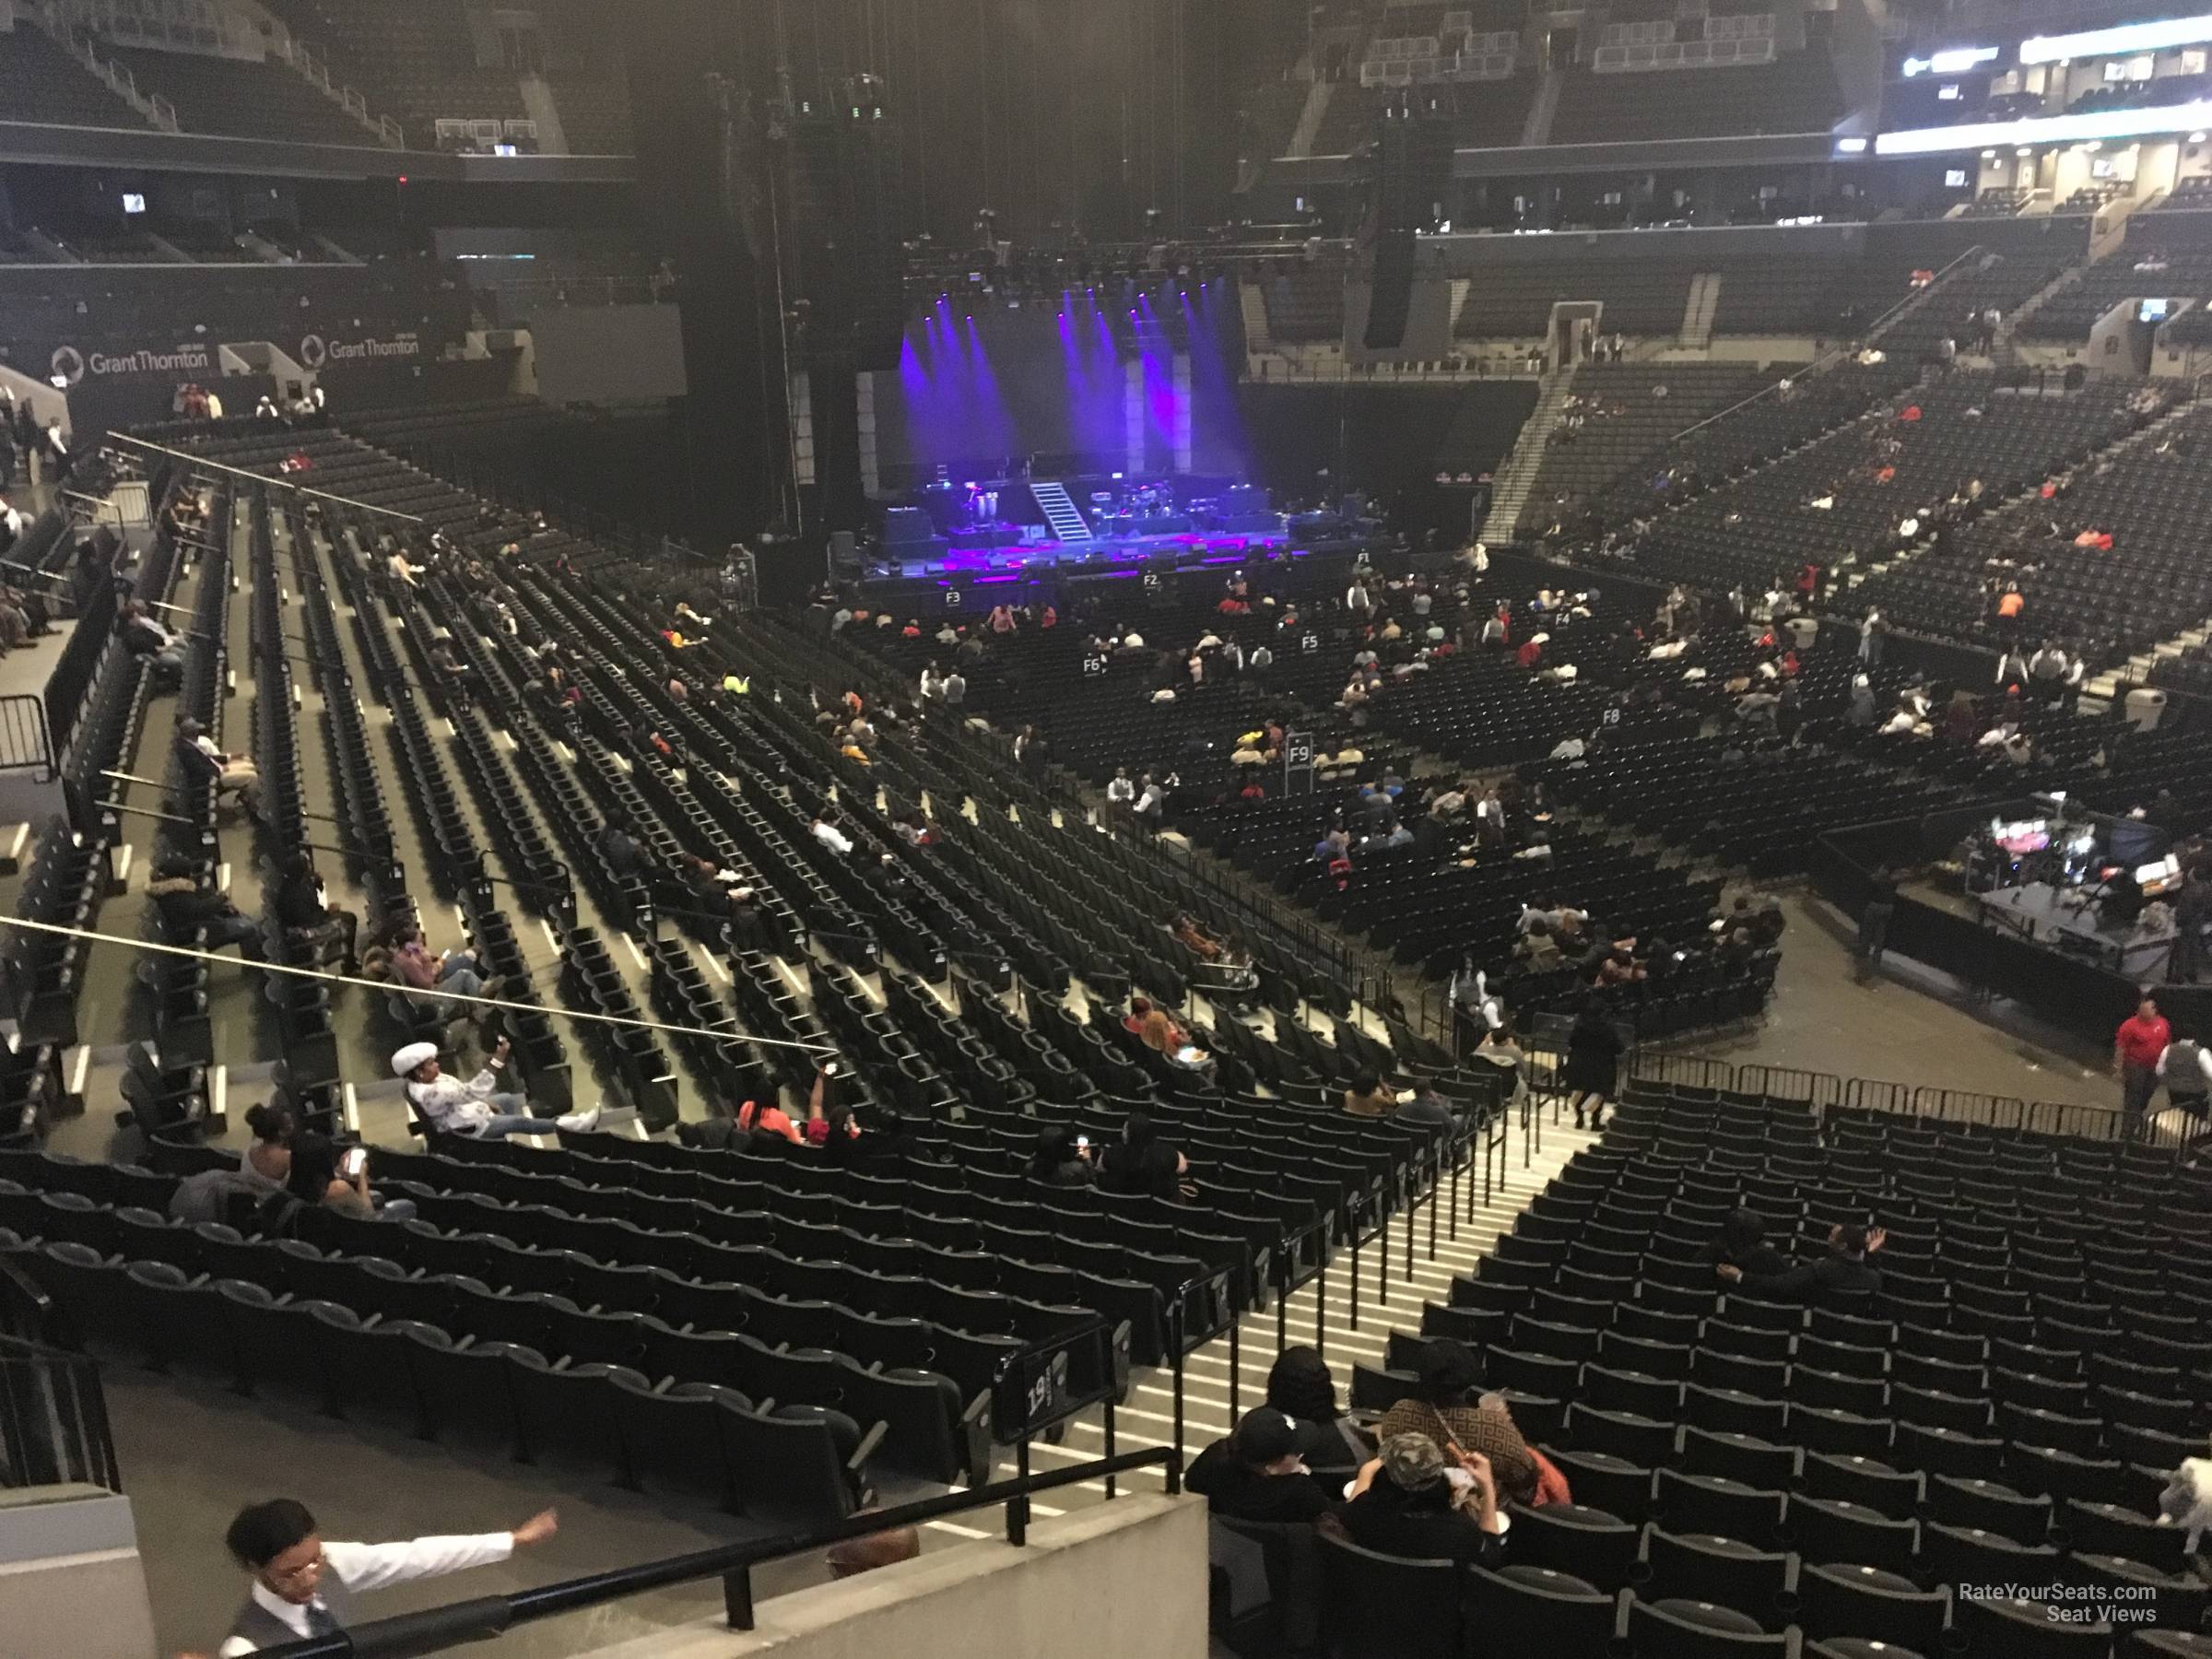 section 120, row 6 seat view  for concert - barclays center